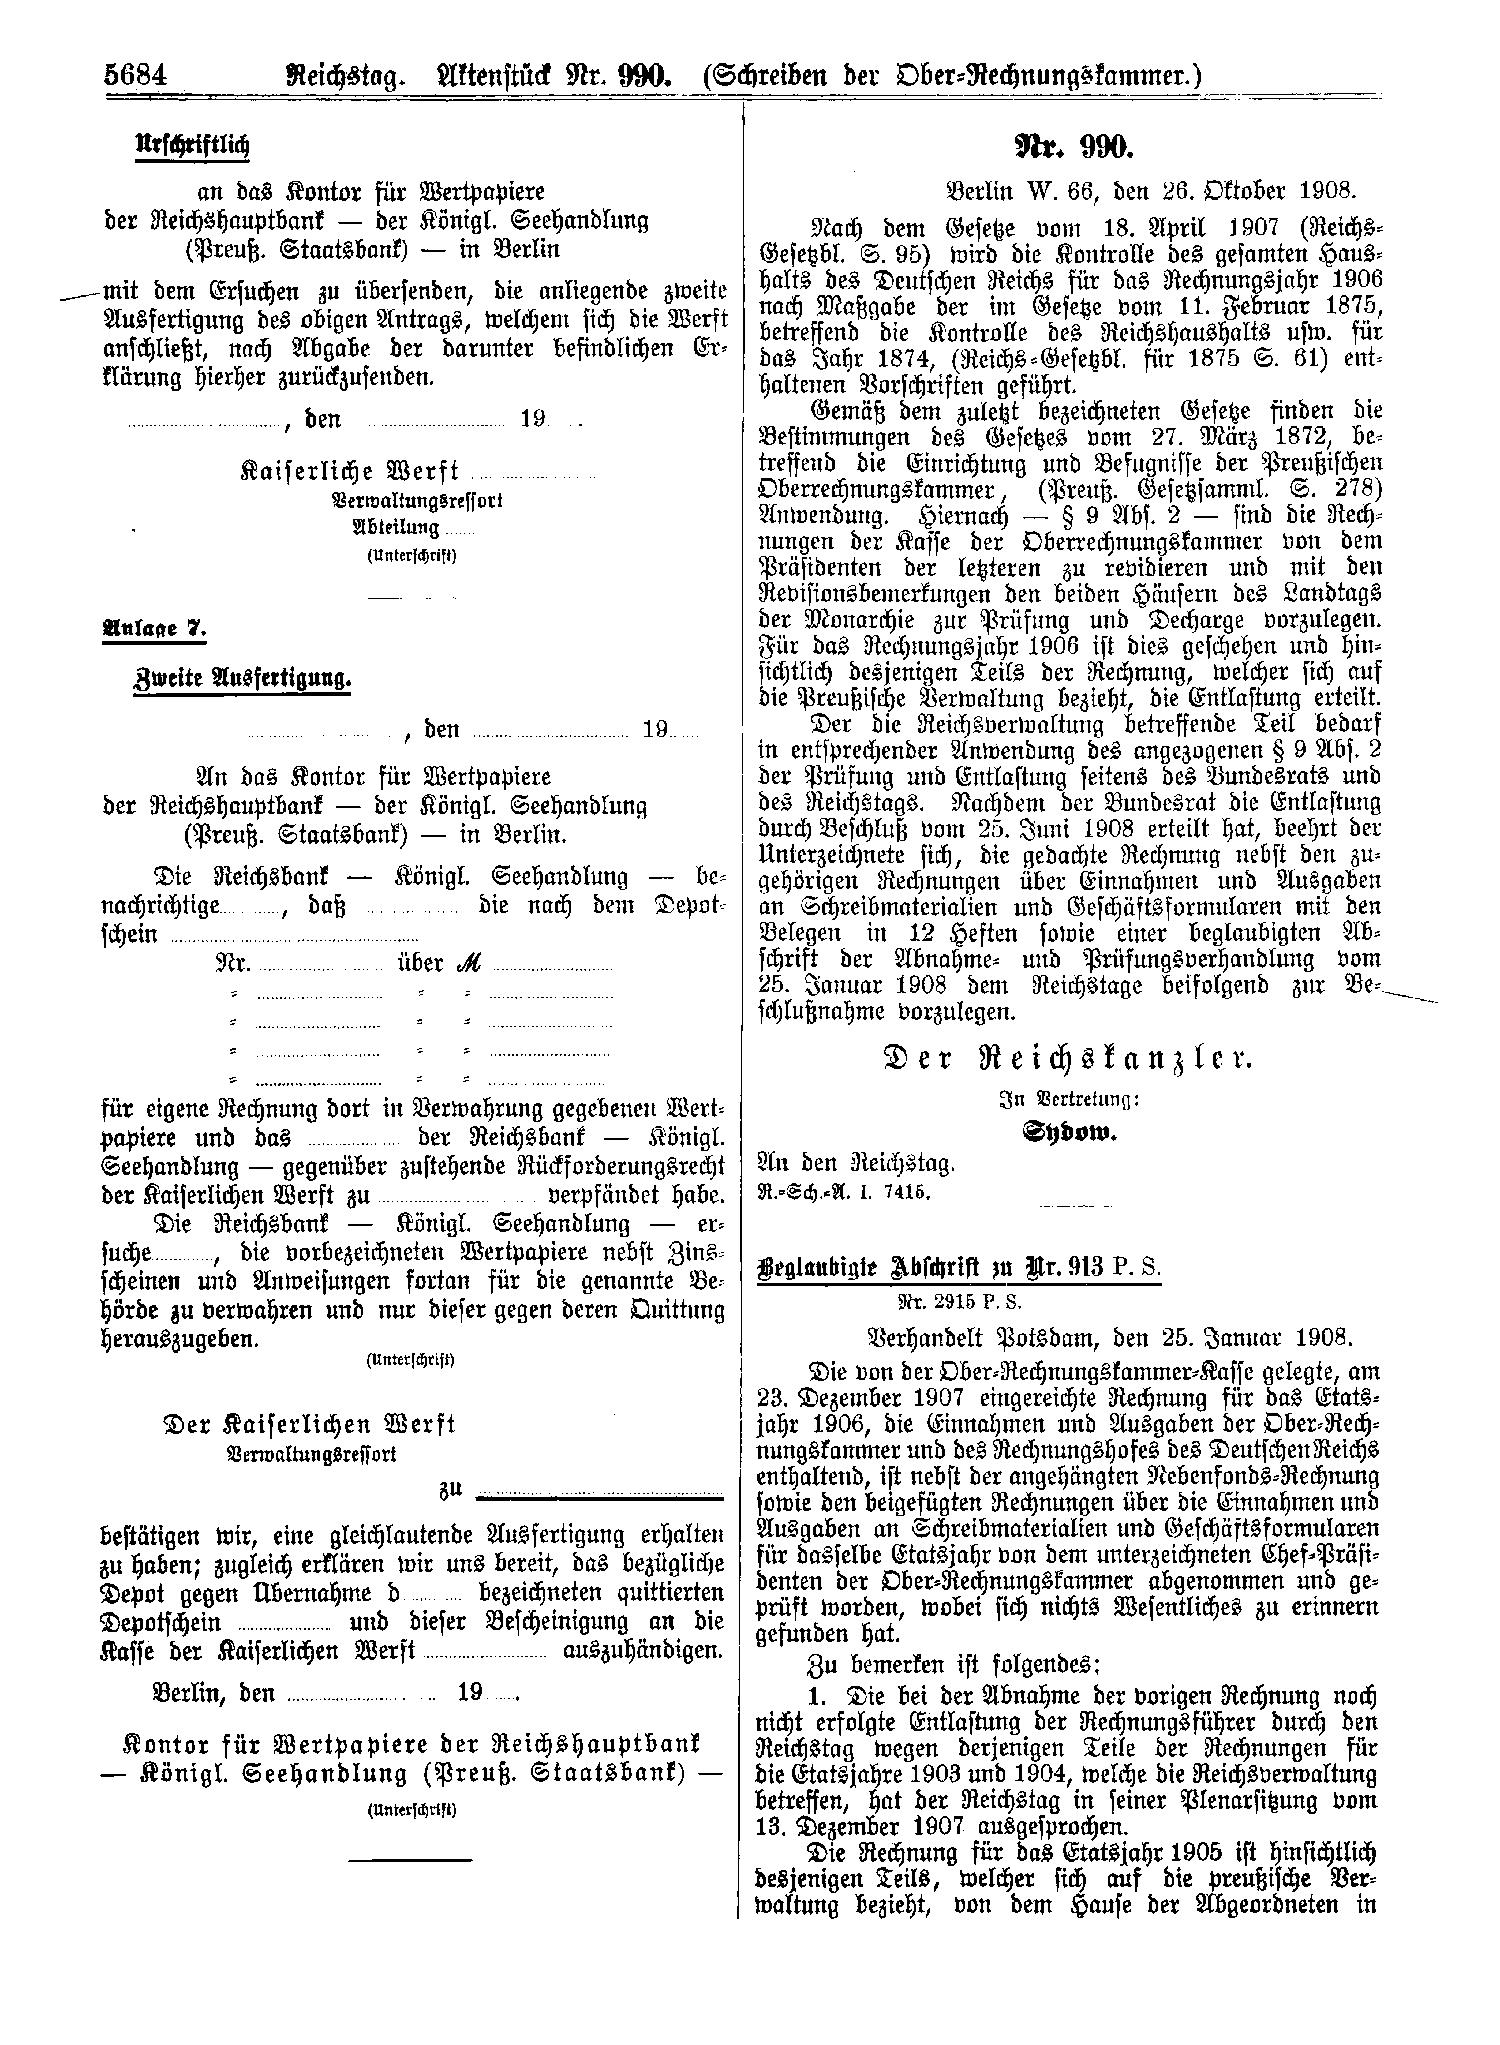 Scan of page 5684